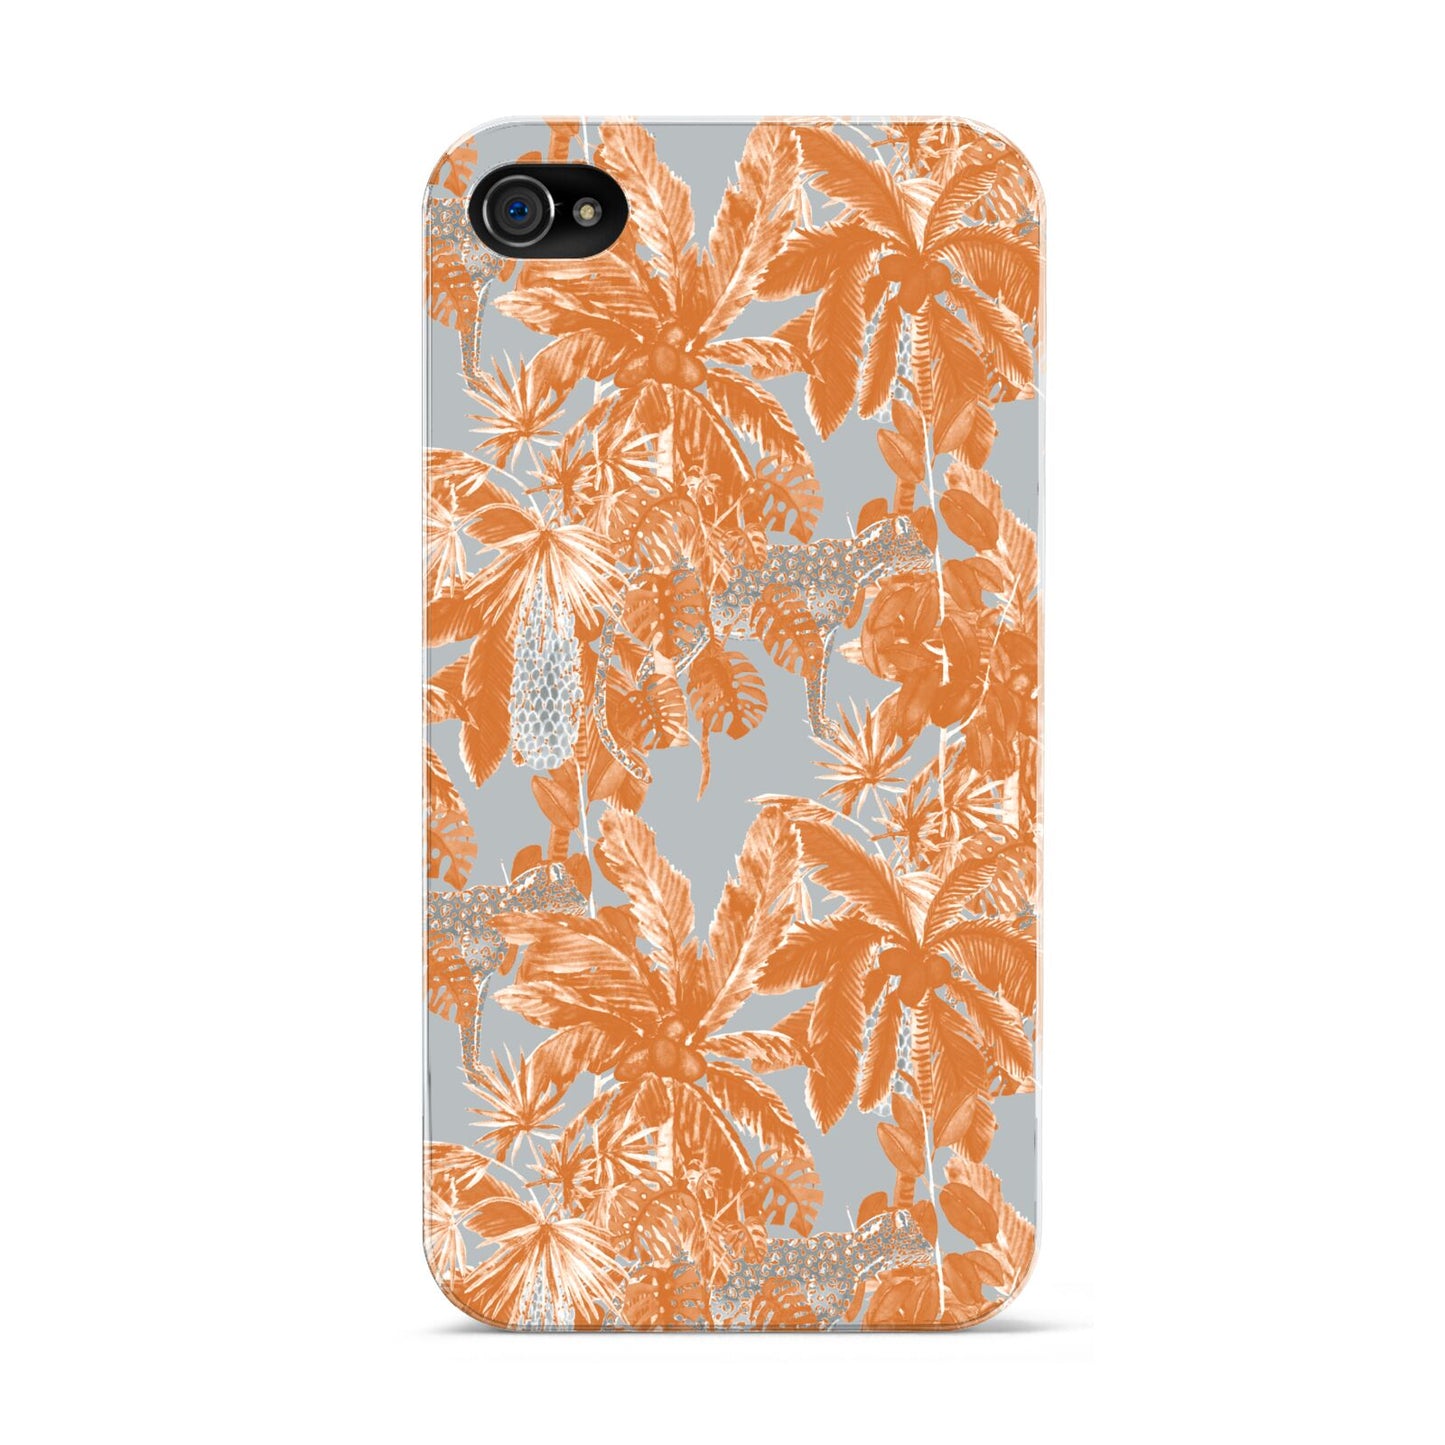 Tropical Apple iPhone 4s Case